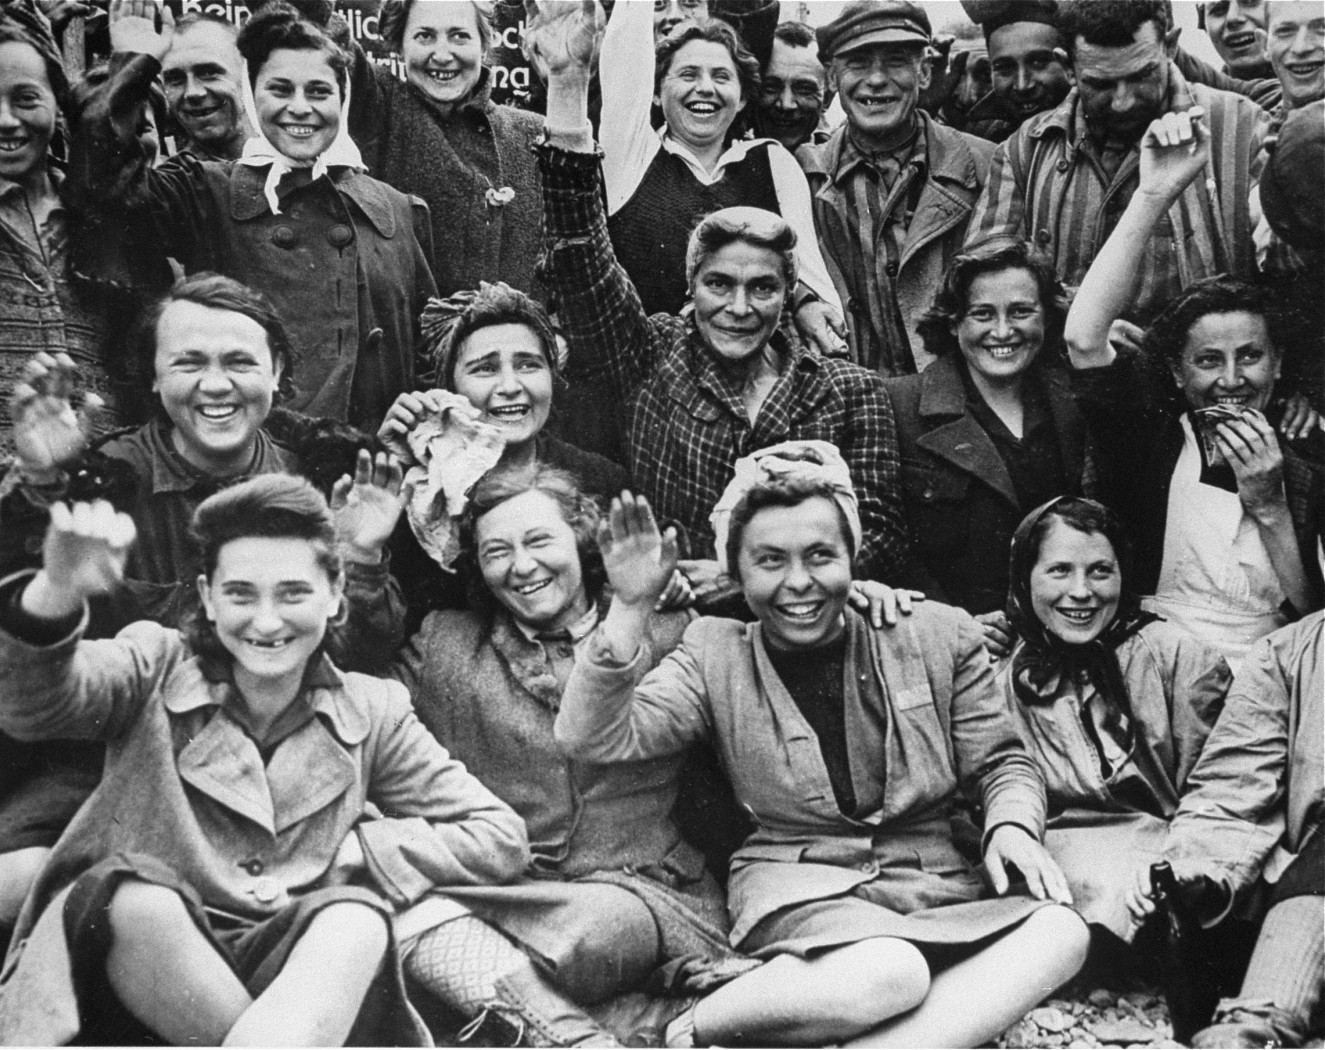 Prisoners celebrating, Dachau Concentration Camp, Germany, 29 Apr 1945; note female prisoners in foreground